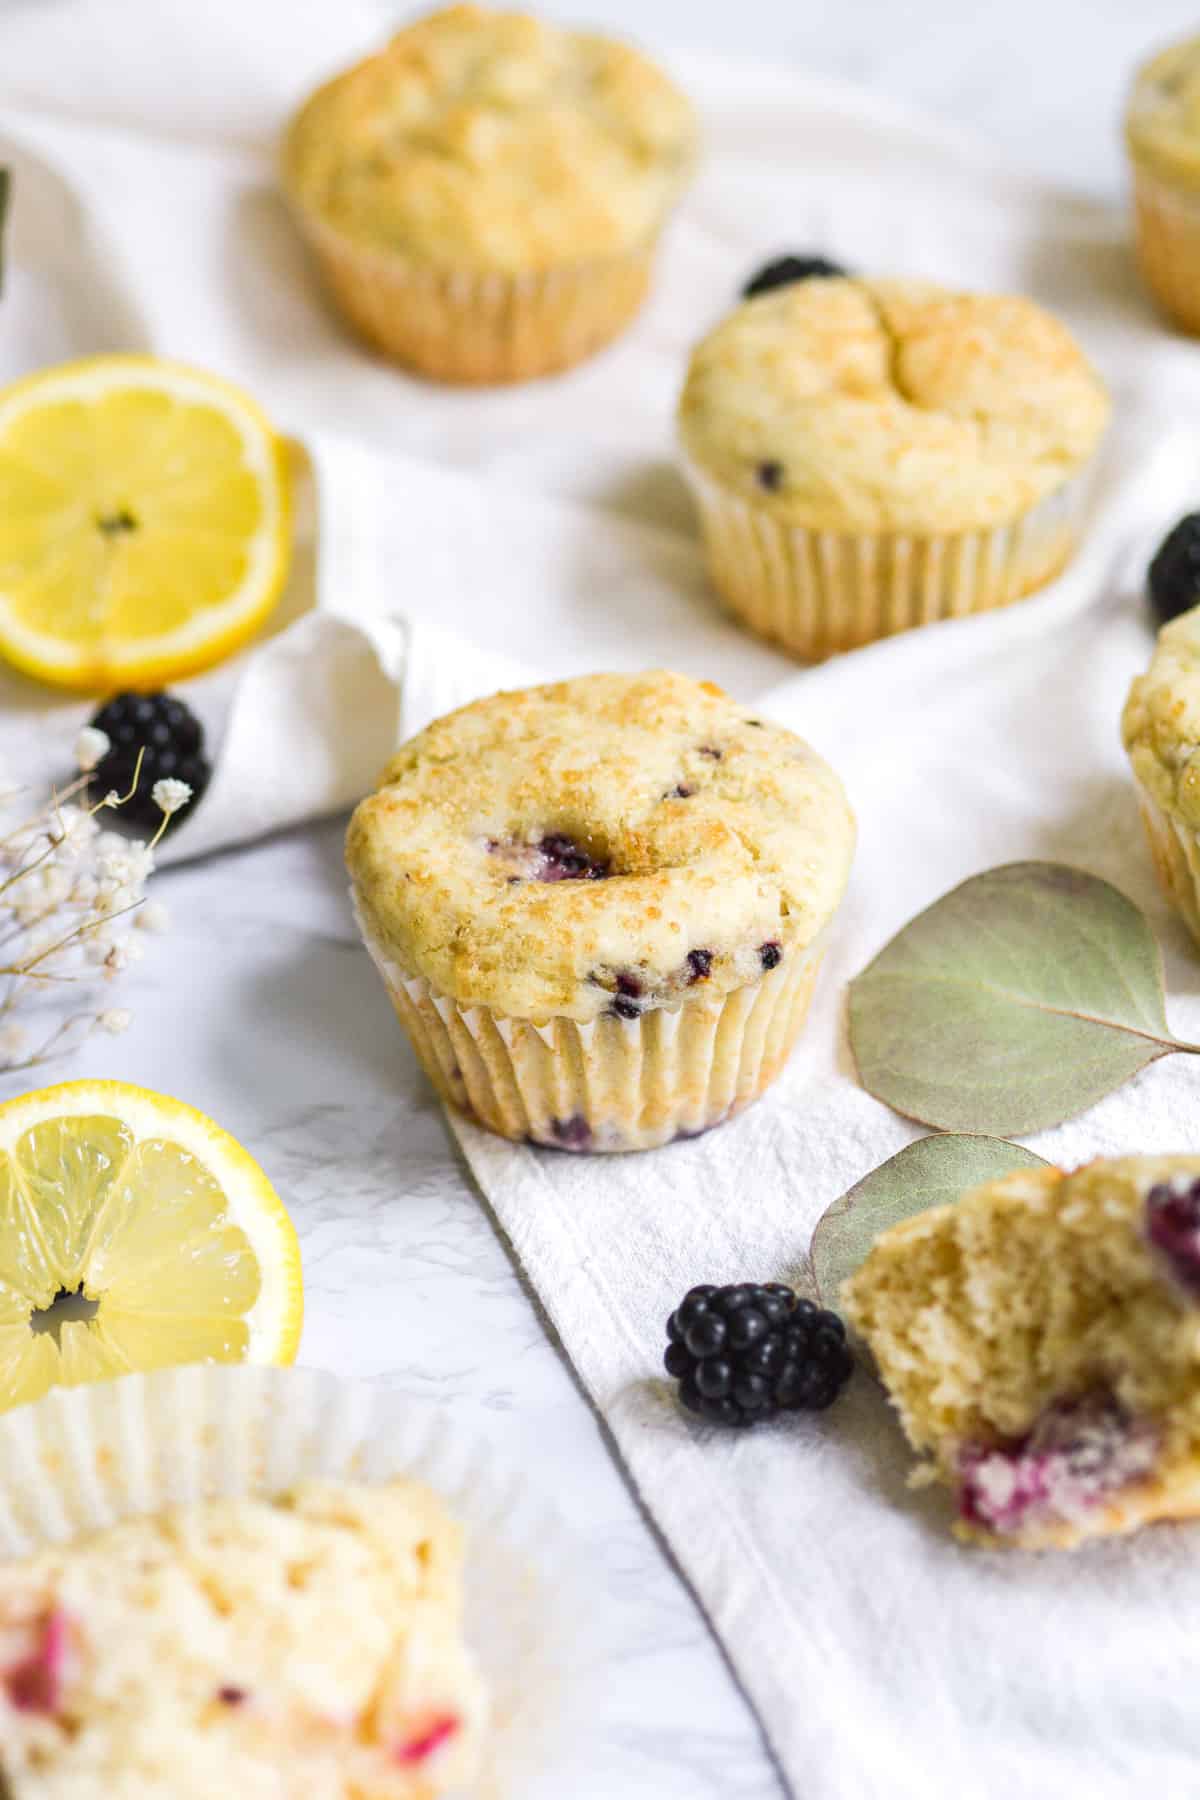 Muffins on a marble board with lemon slices and blackberries in the background